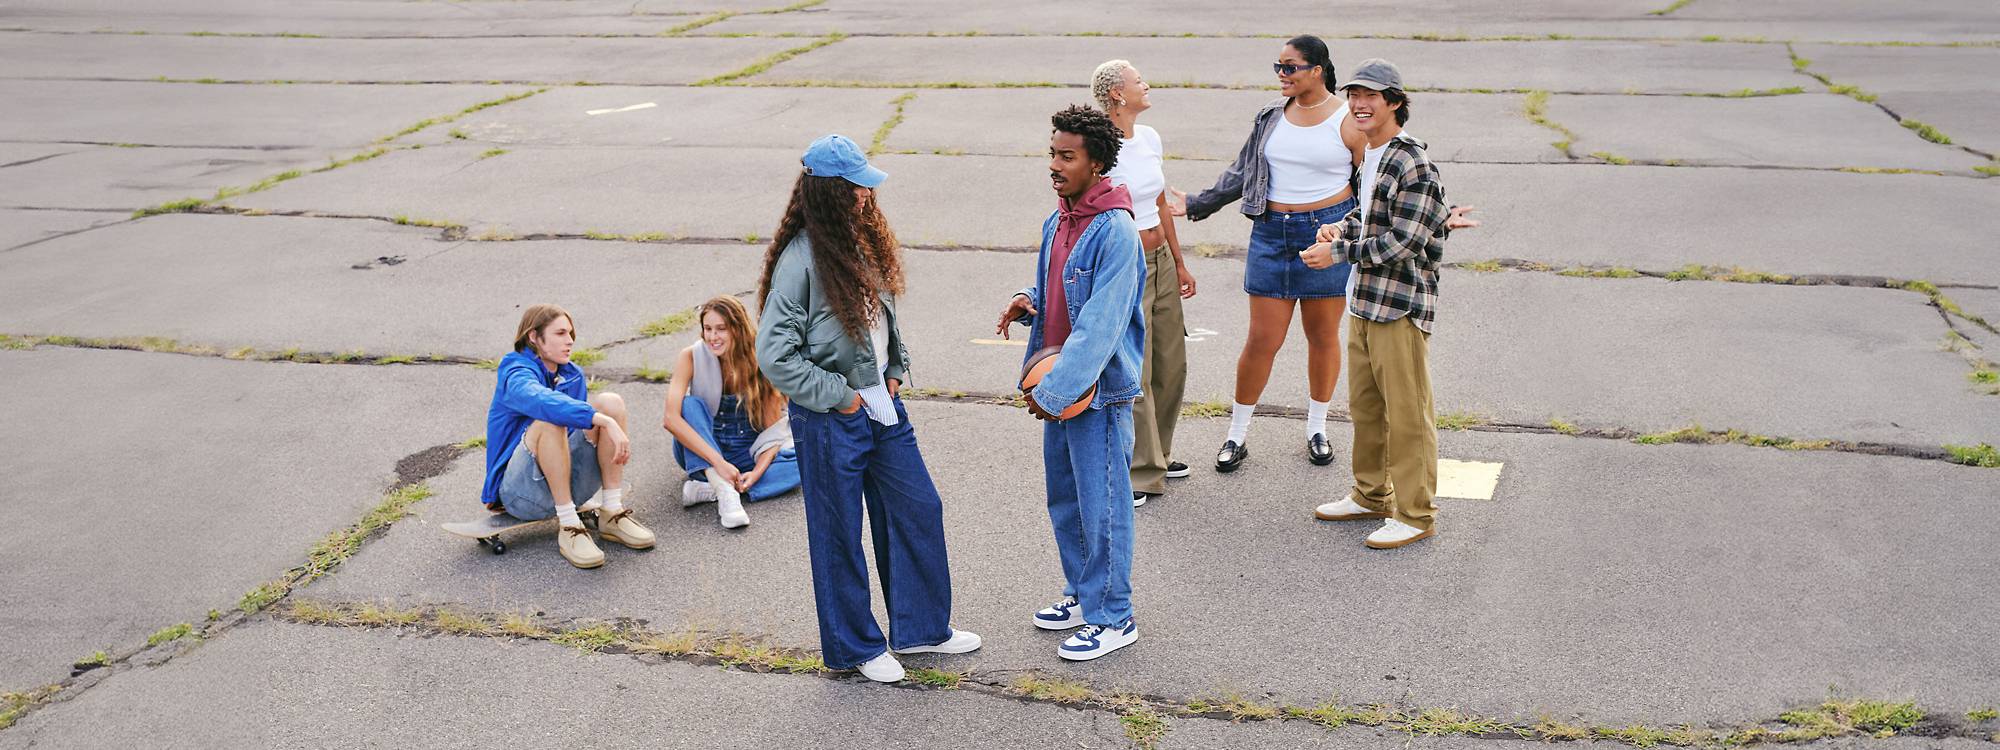 Large group shot of models outdoors in concrete lot wearing assorted denim looks and casual streetwear